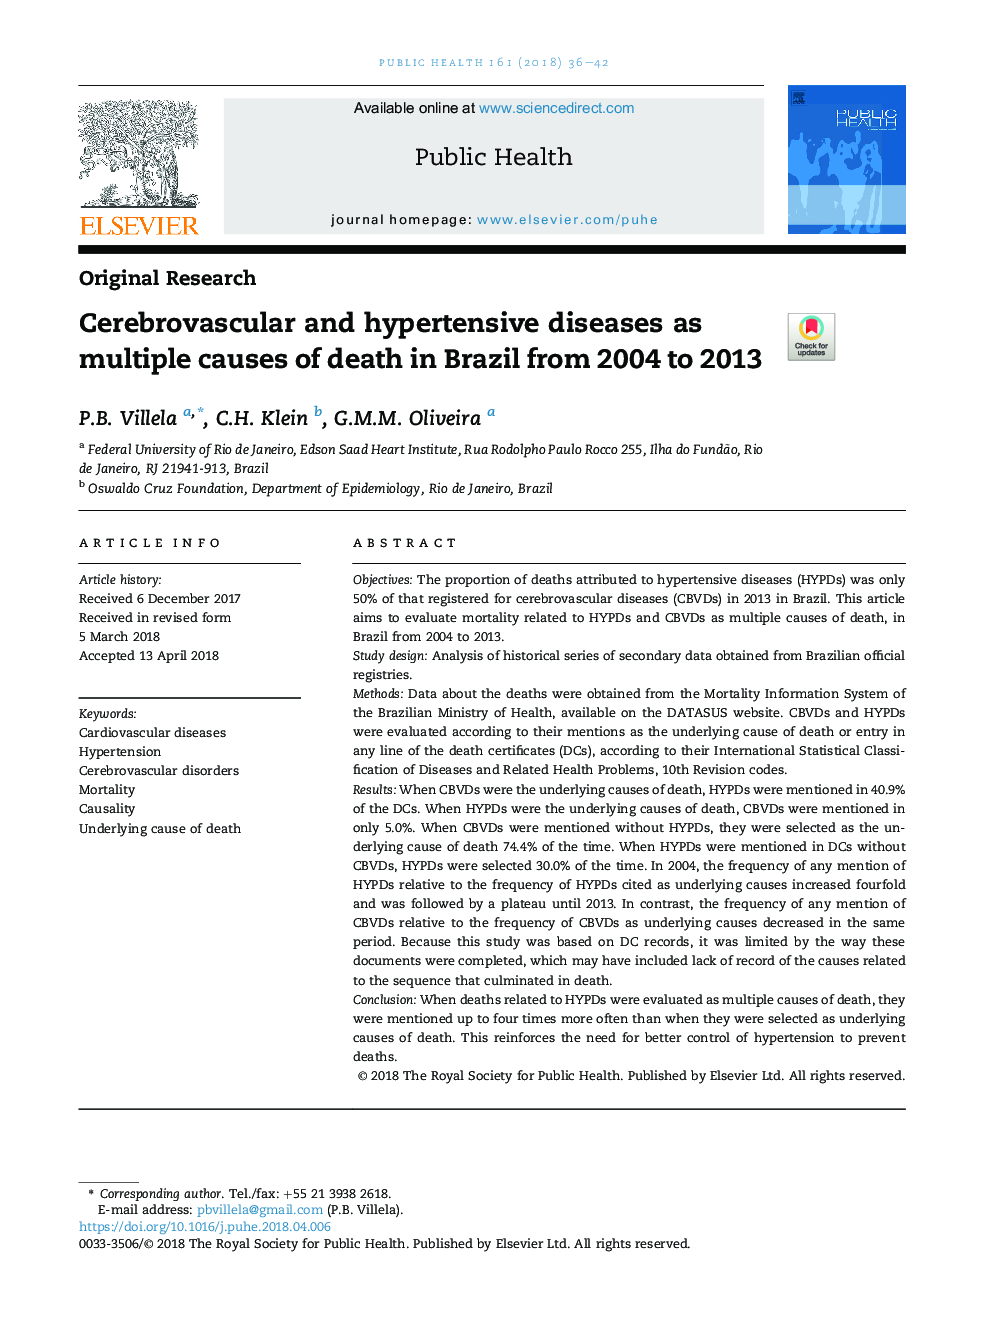 Cerebrovascular and hypertensive diseases as multiple causes of death in Brazil from 2004 to 2013